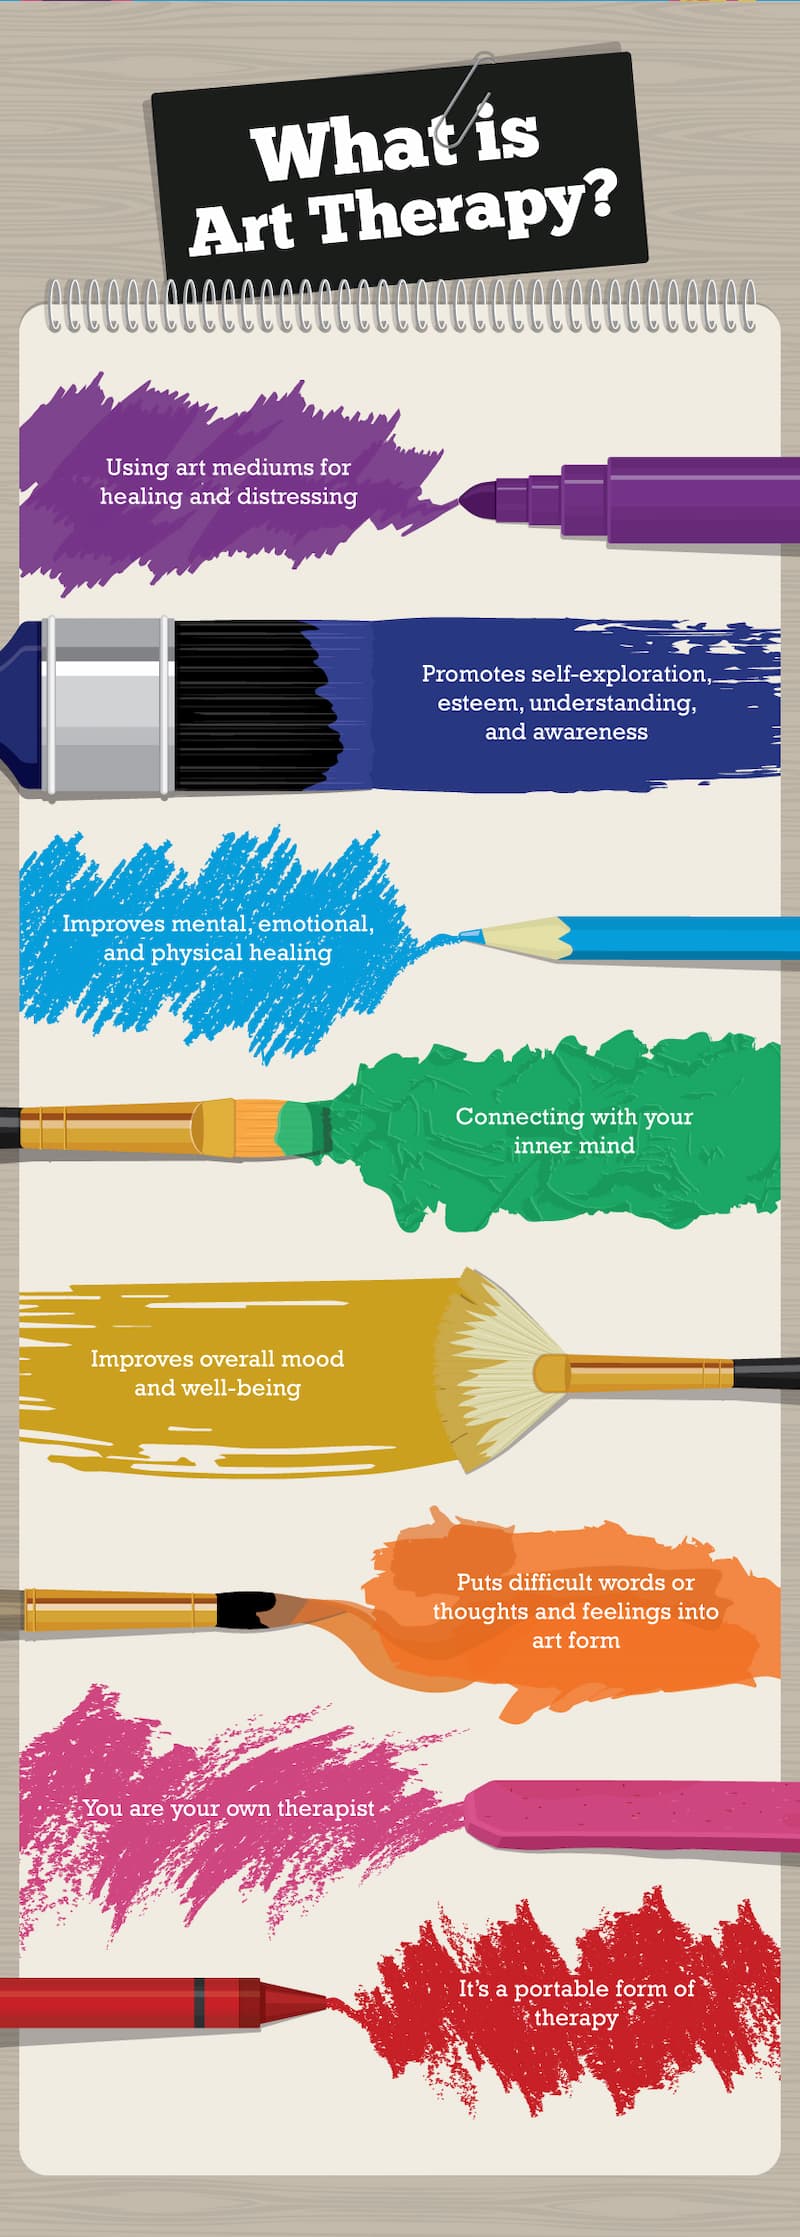 Top benefits of art therapy